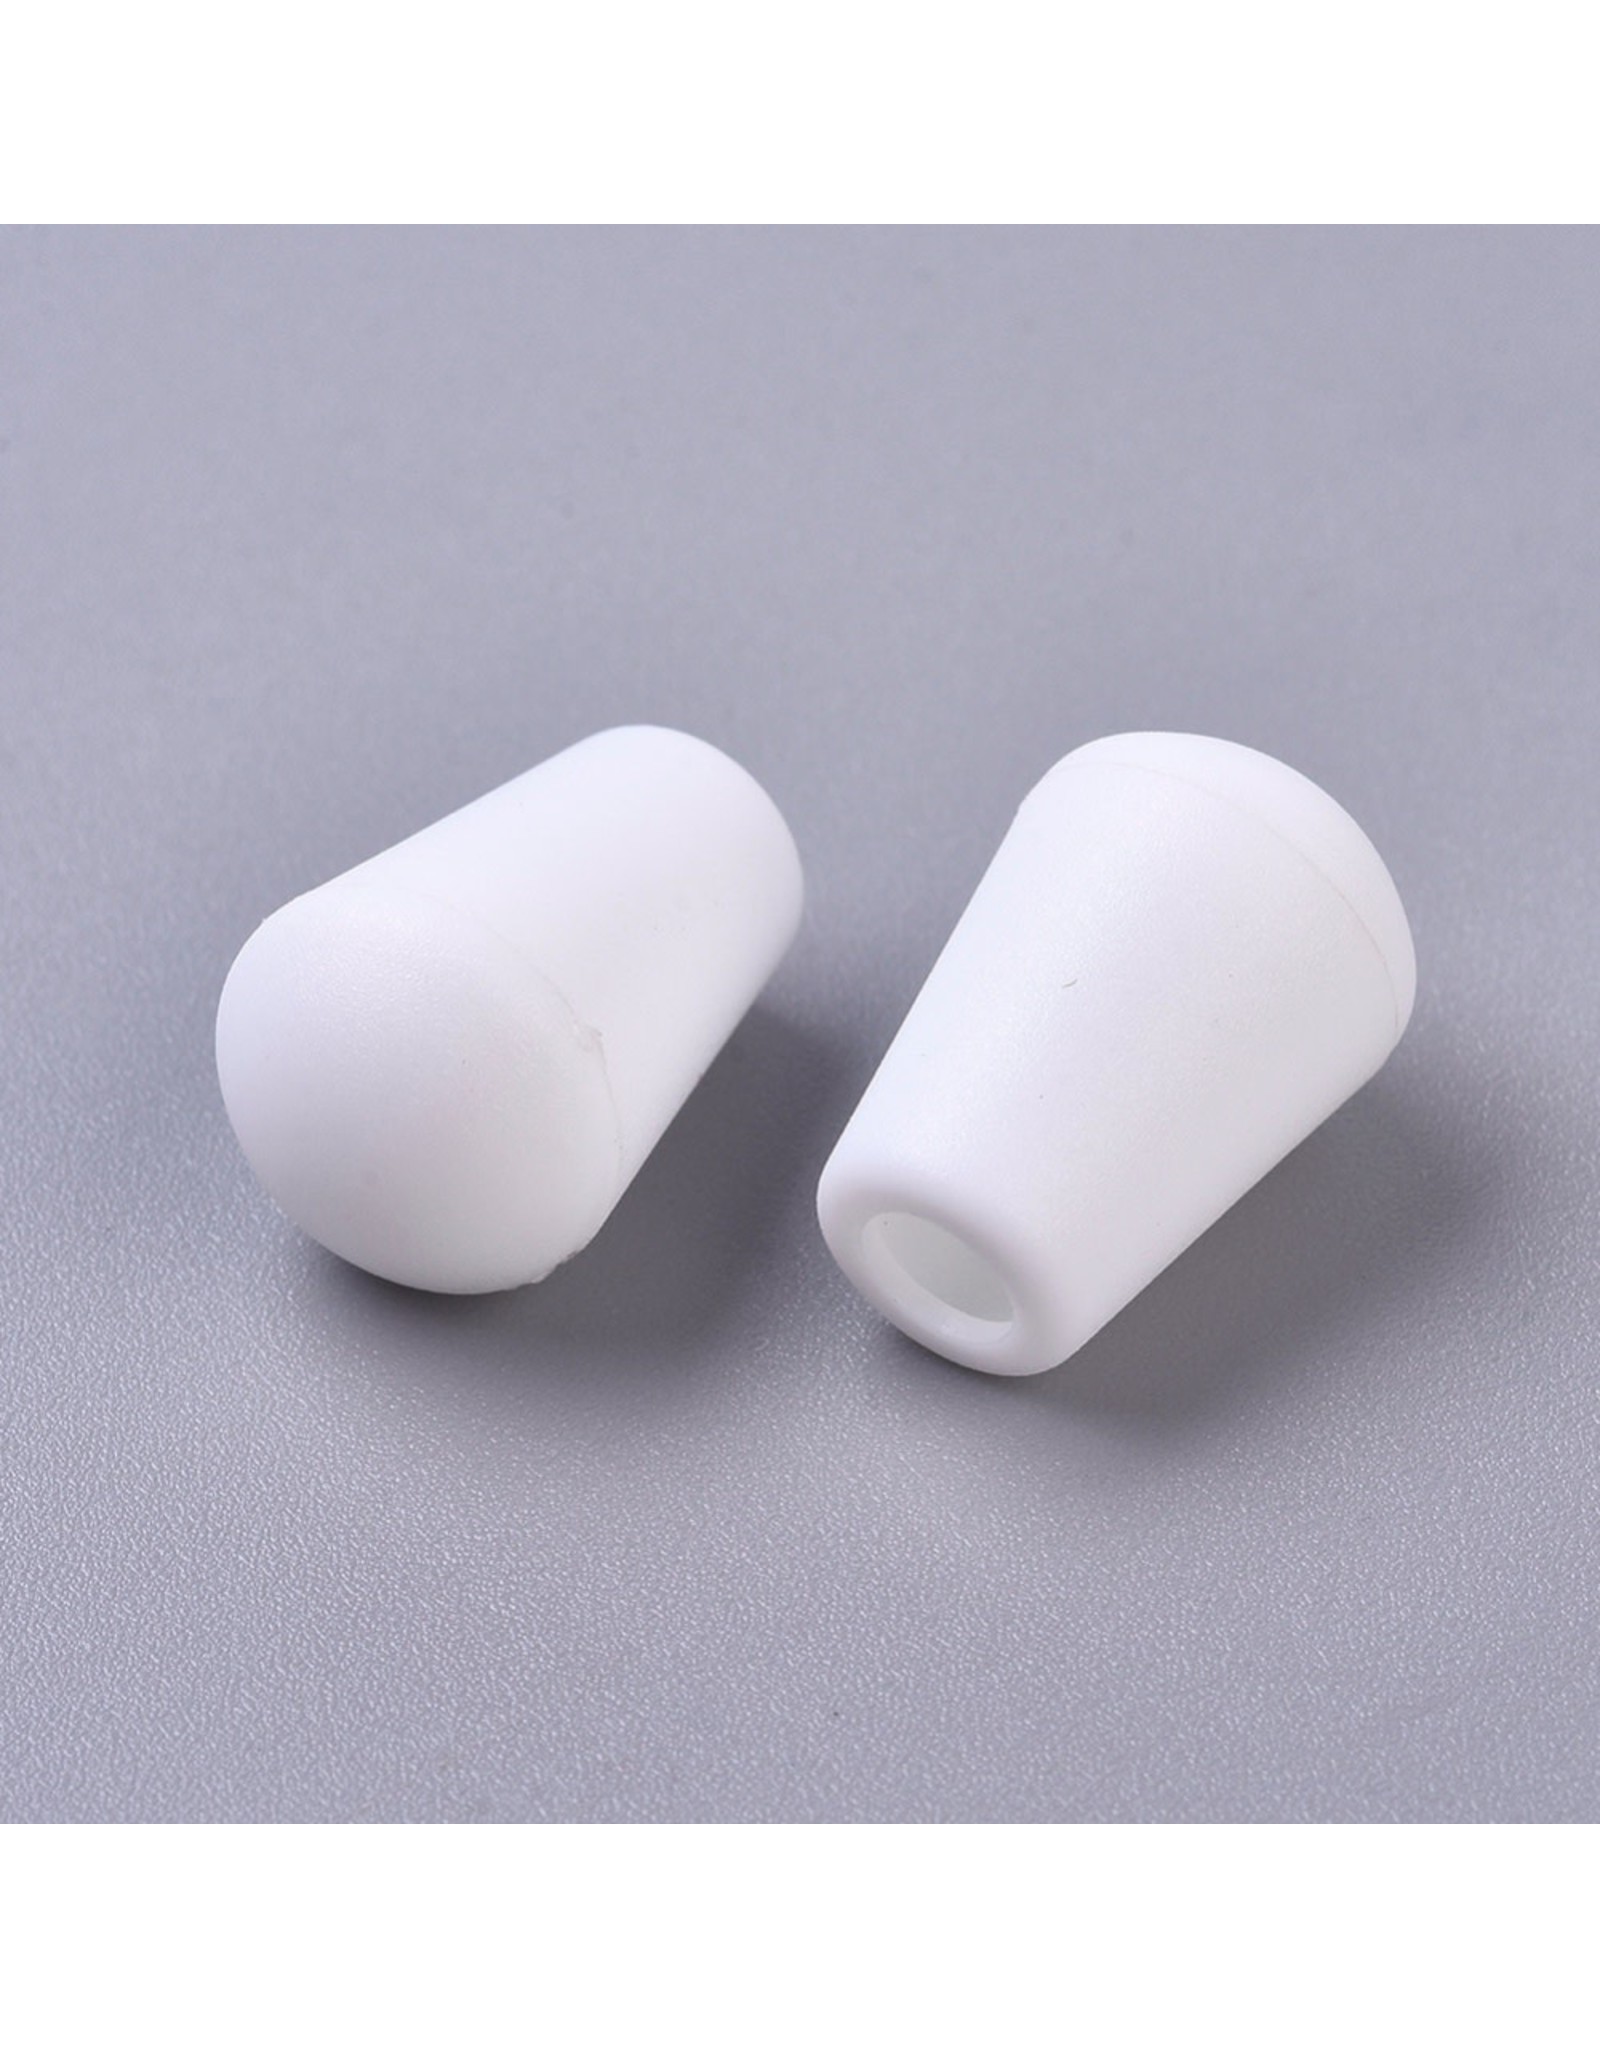 Bell Stopper Cord End  18x12mm White  x10